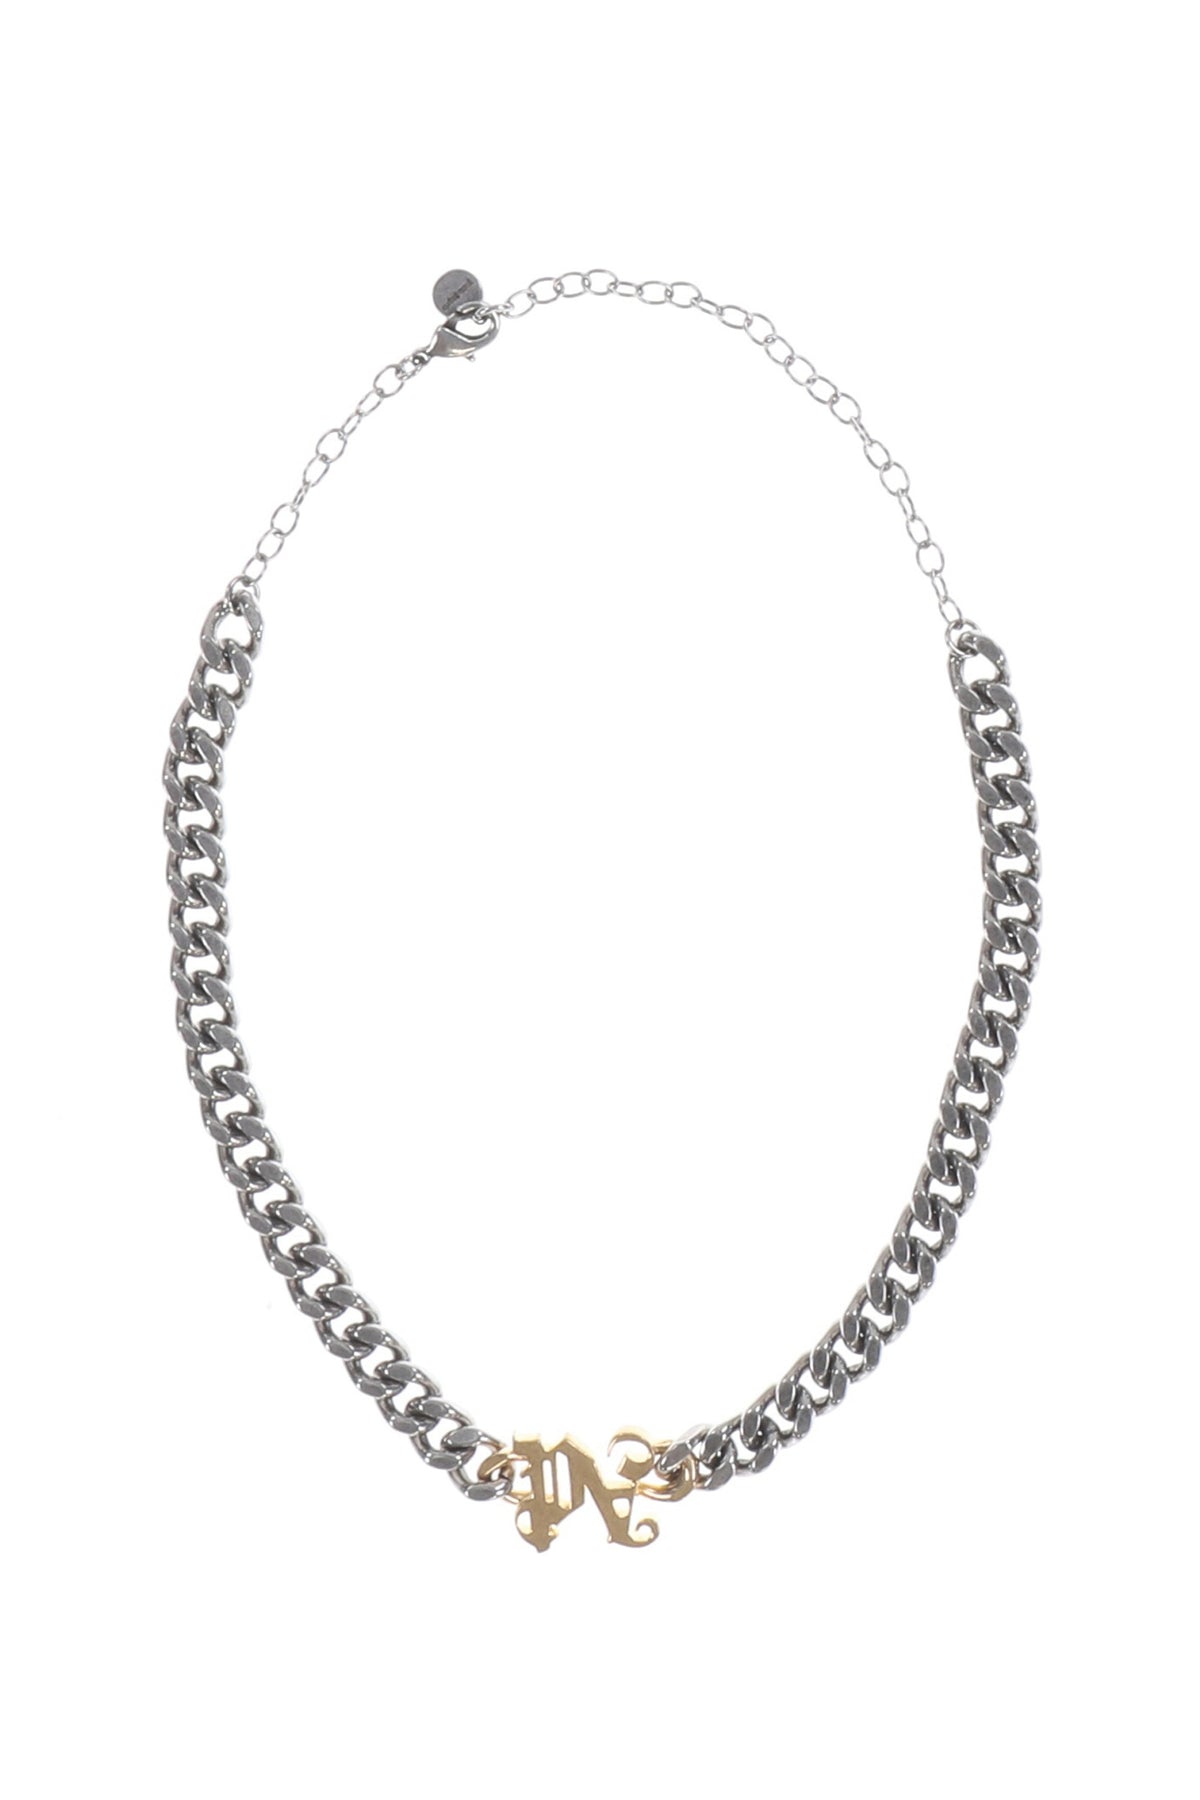 PA MONOGRAM CHAIN NECKLACE / SIL GOLD